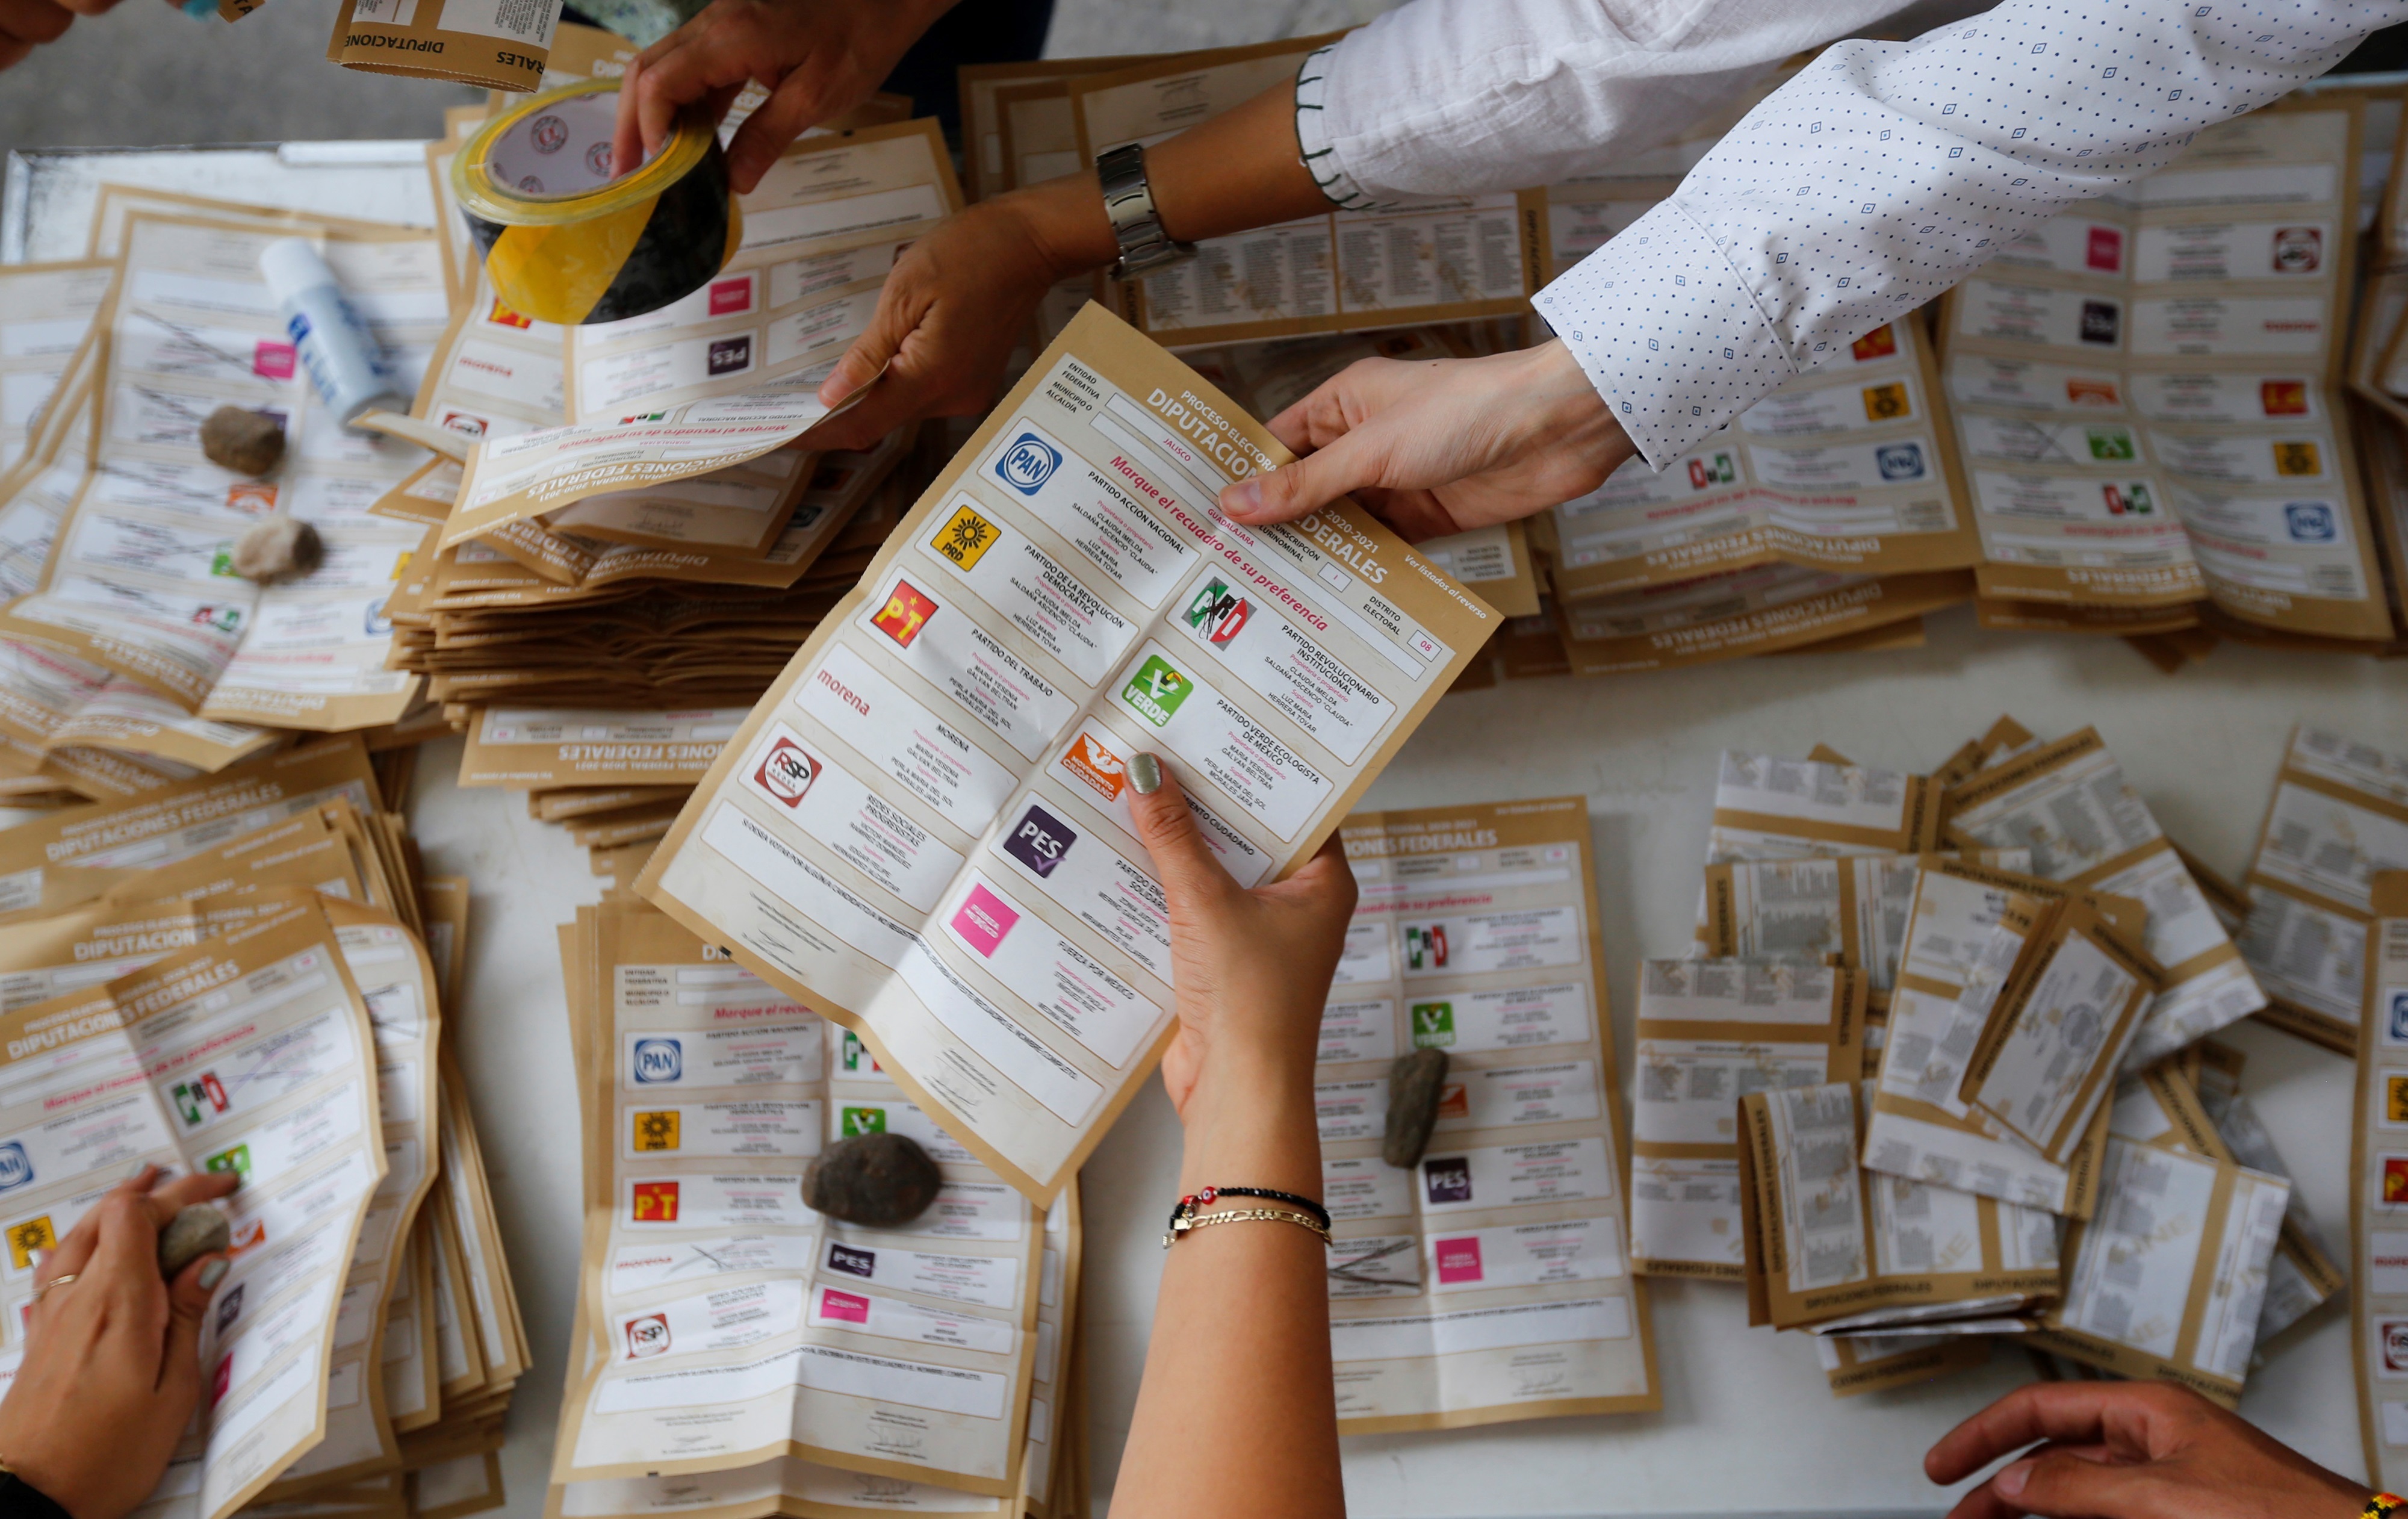 File photo dated June 6, 2021, showing the counting of votes at a polling station in the city of Guadalajara, Jalisco state (Mexico).  EFE / Francisco Guasco